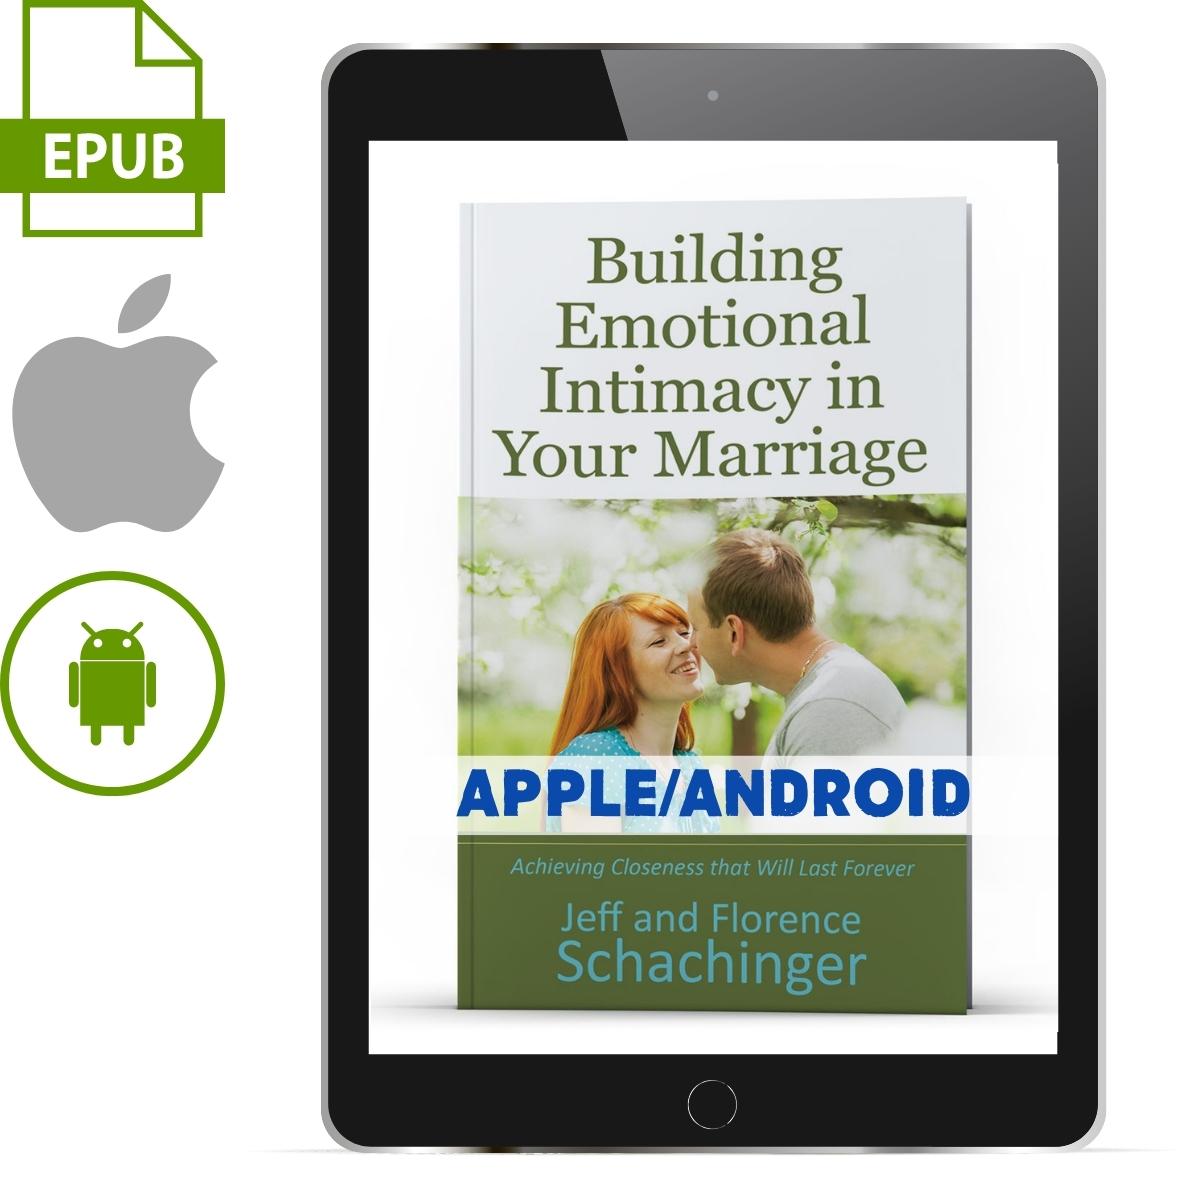 Building Emotional Intimacy in Your Marriage (Apple/Android Version) - Illumination Publishers